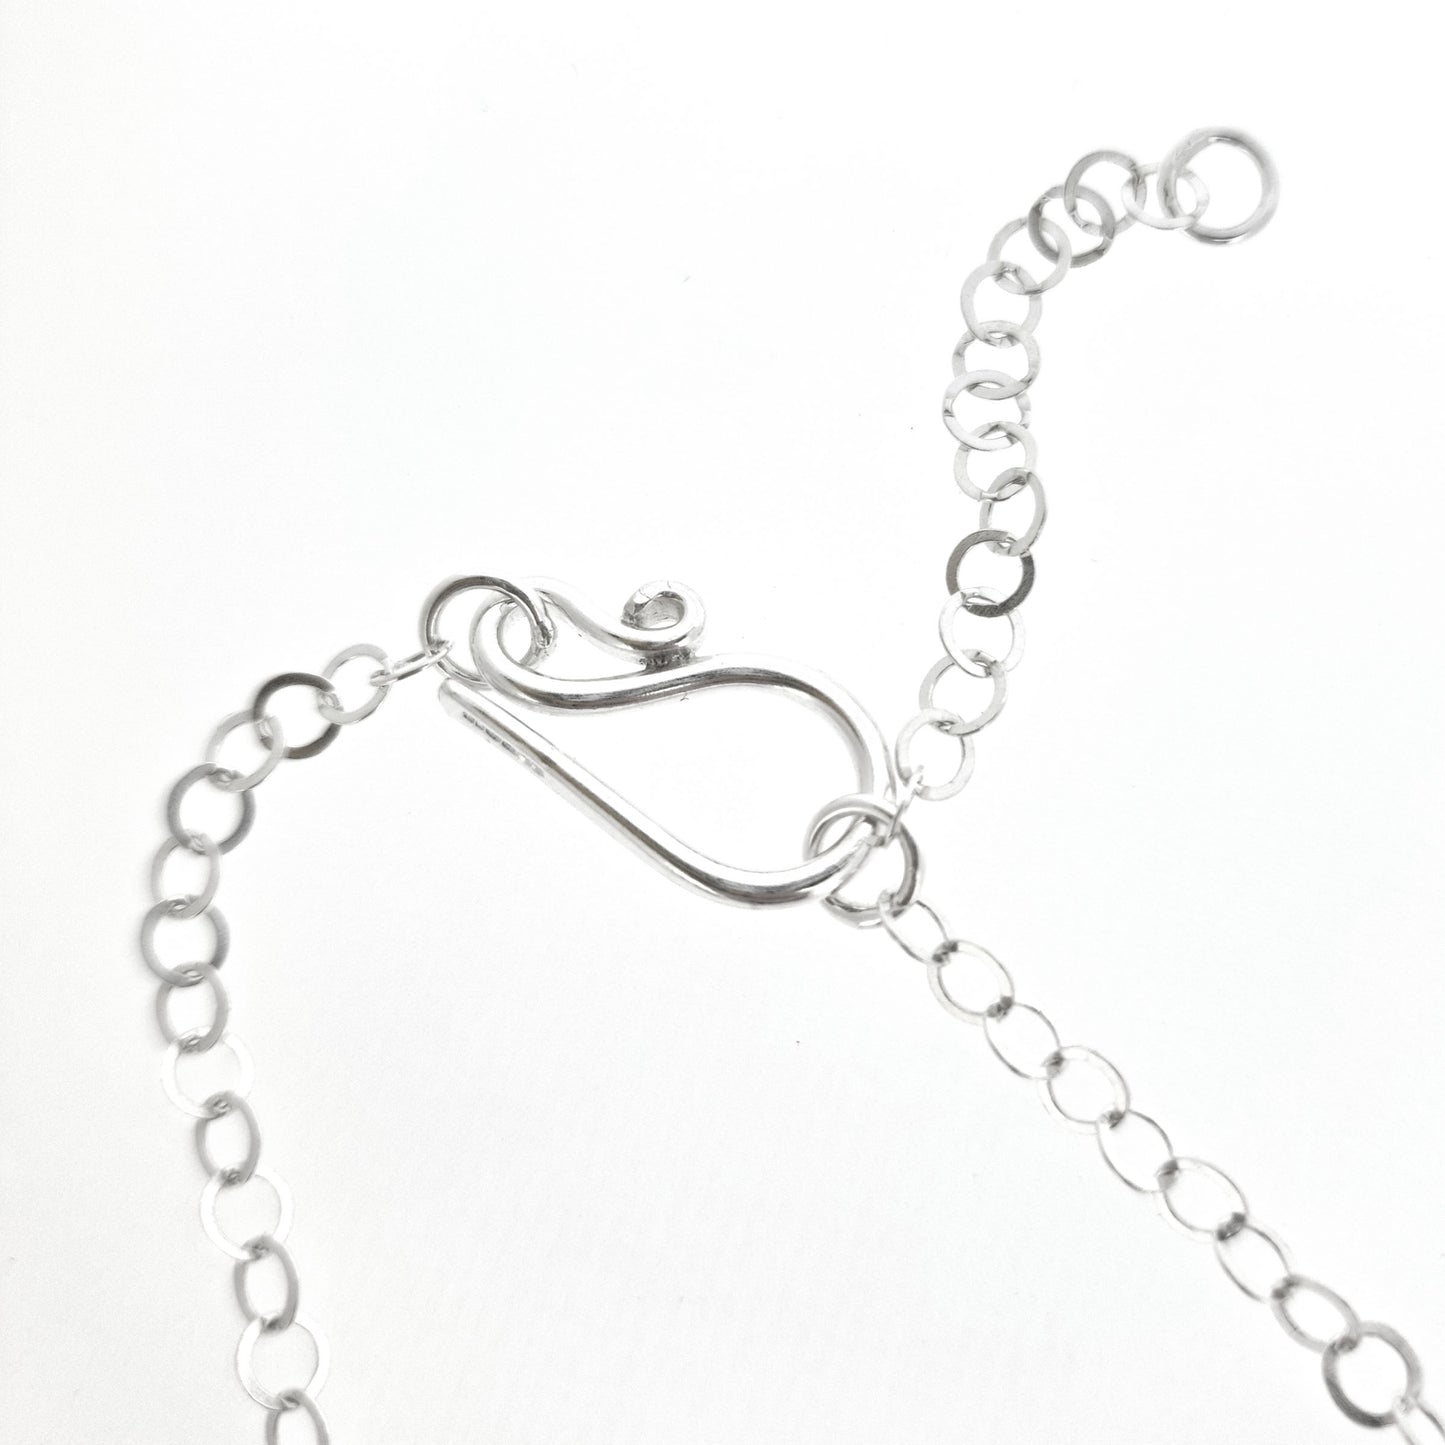 Silver s clasp and open link chain.